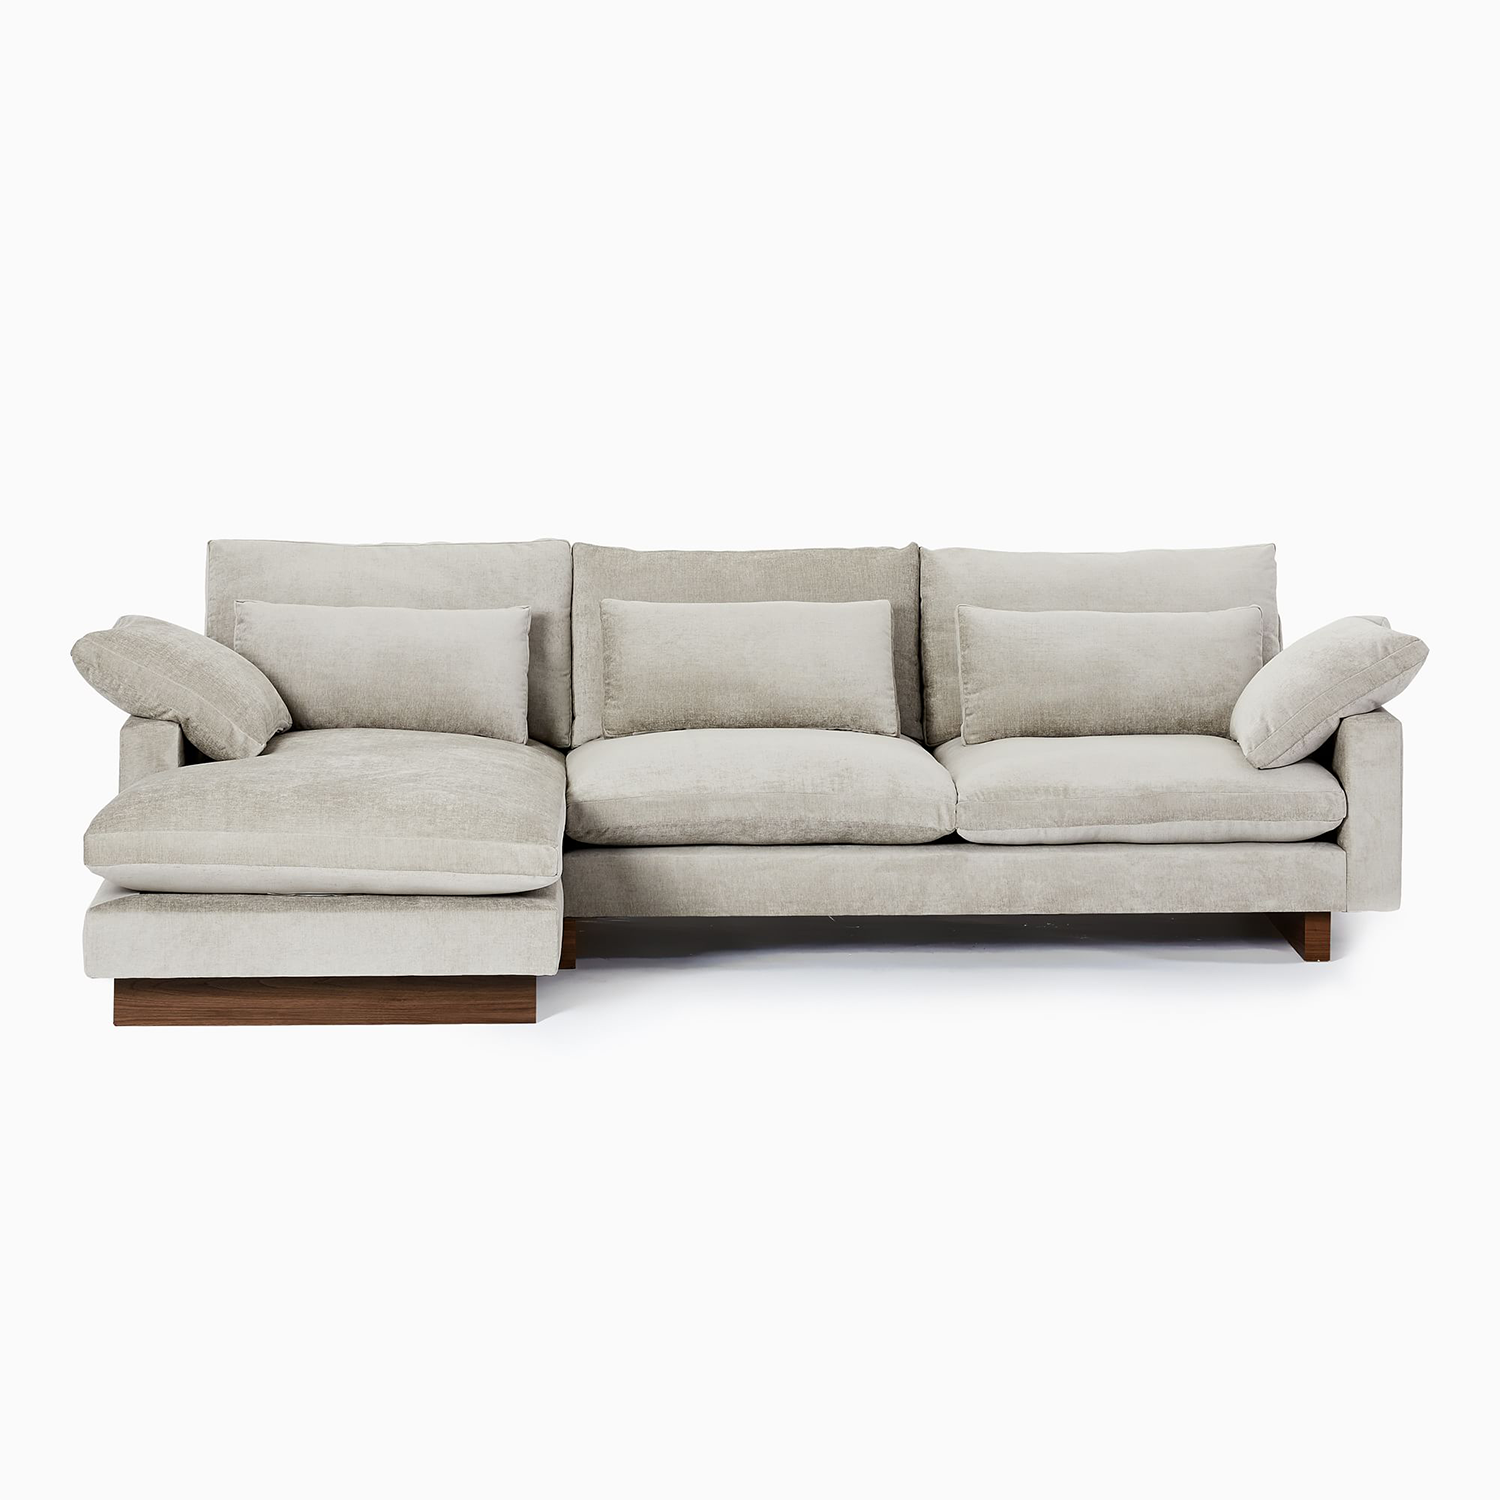 Harmony 2-Piece Chaise Sectional